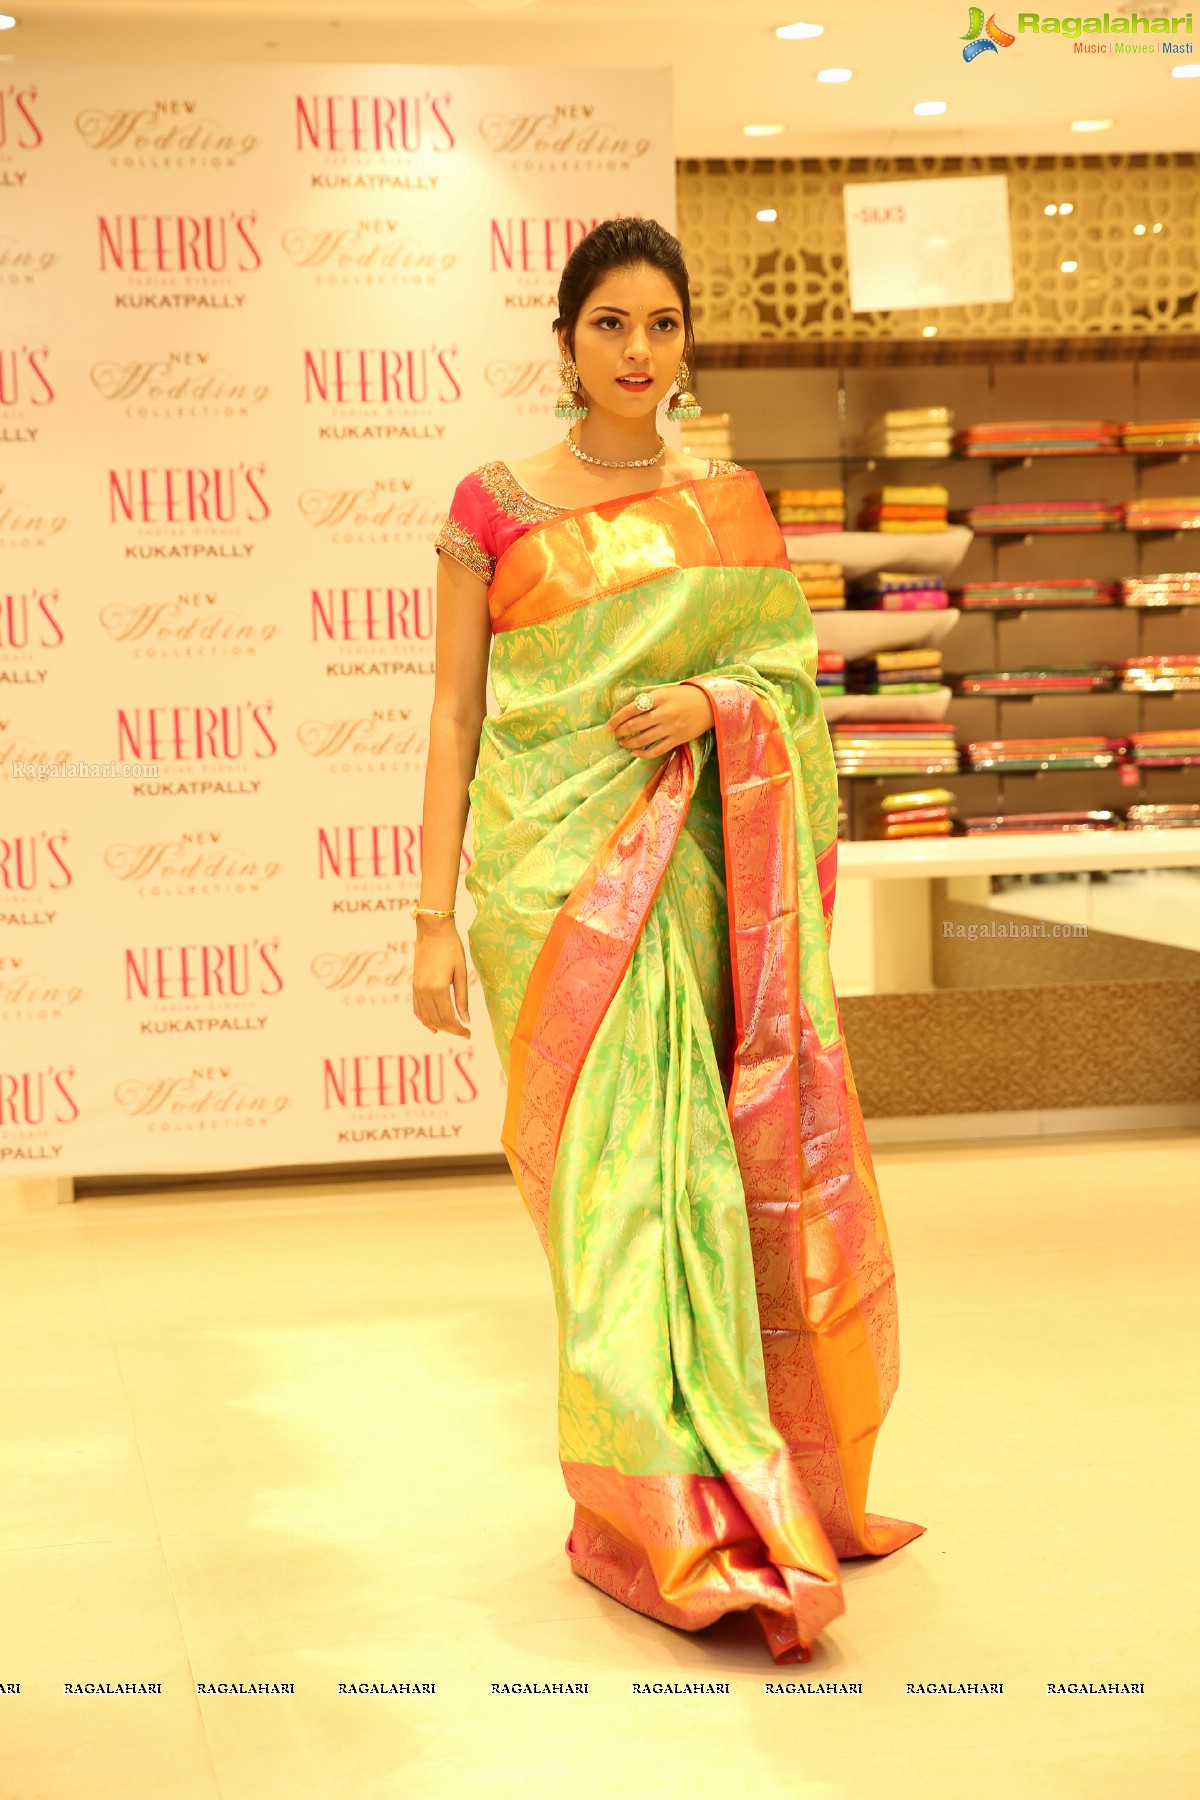 Neeru's India Launches 2019 Wedding & Festival Collection